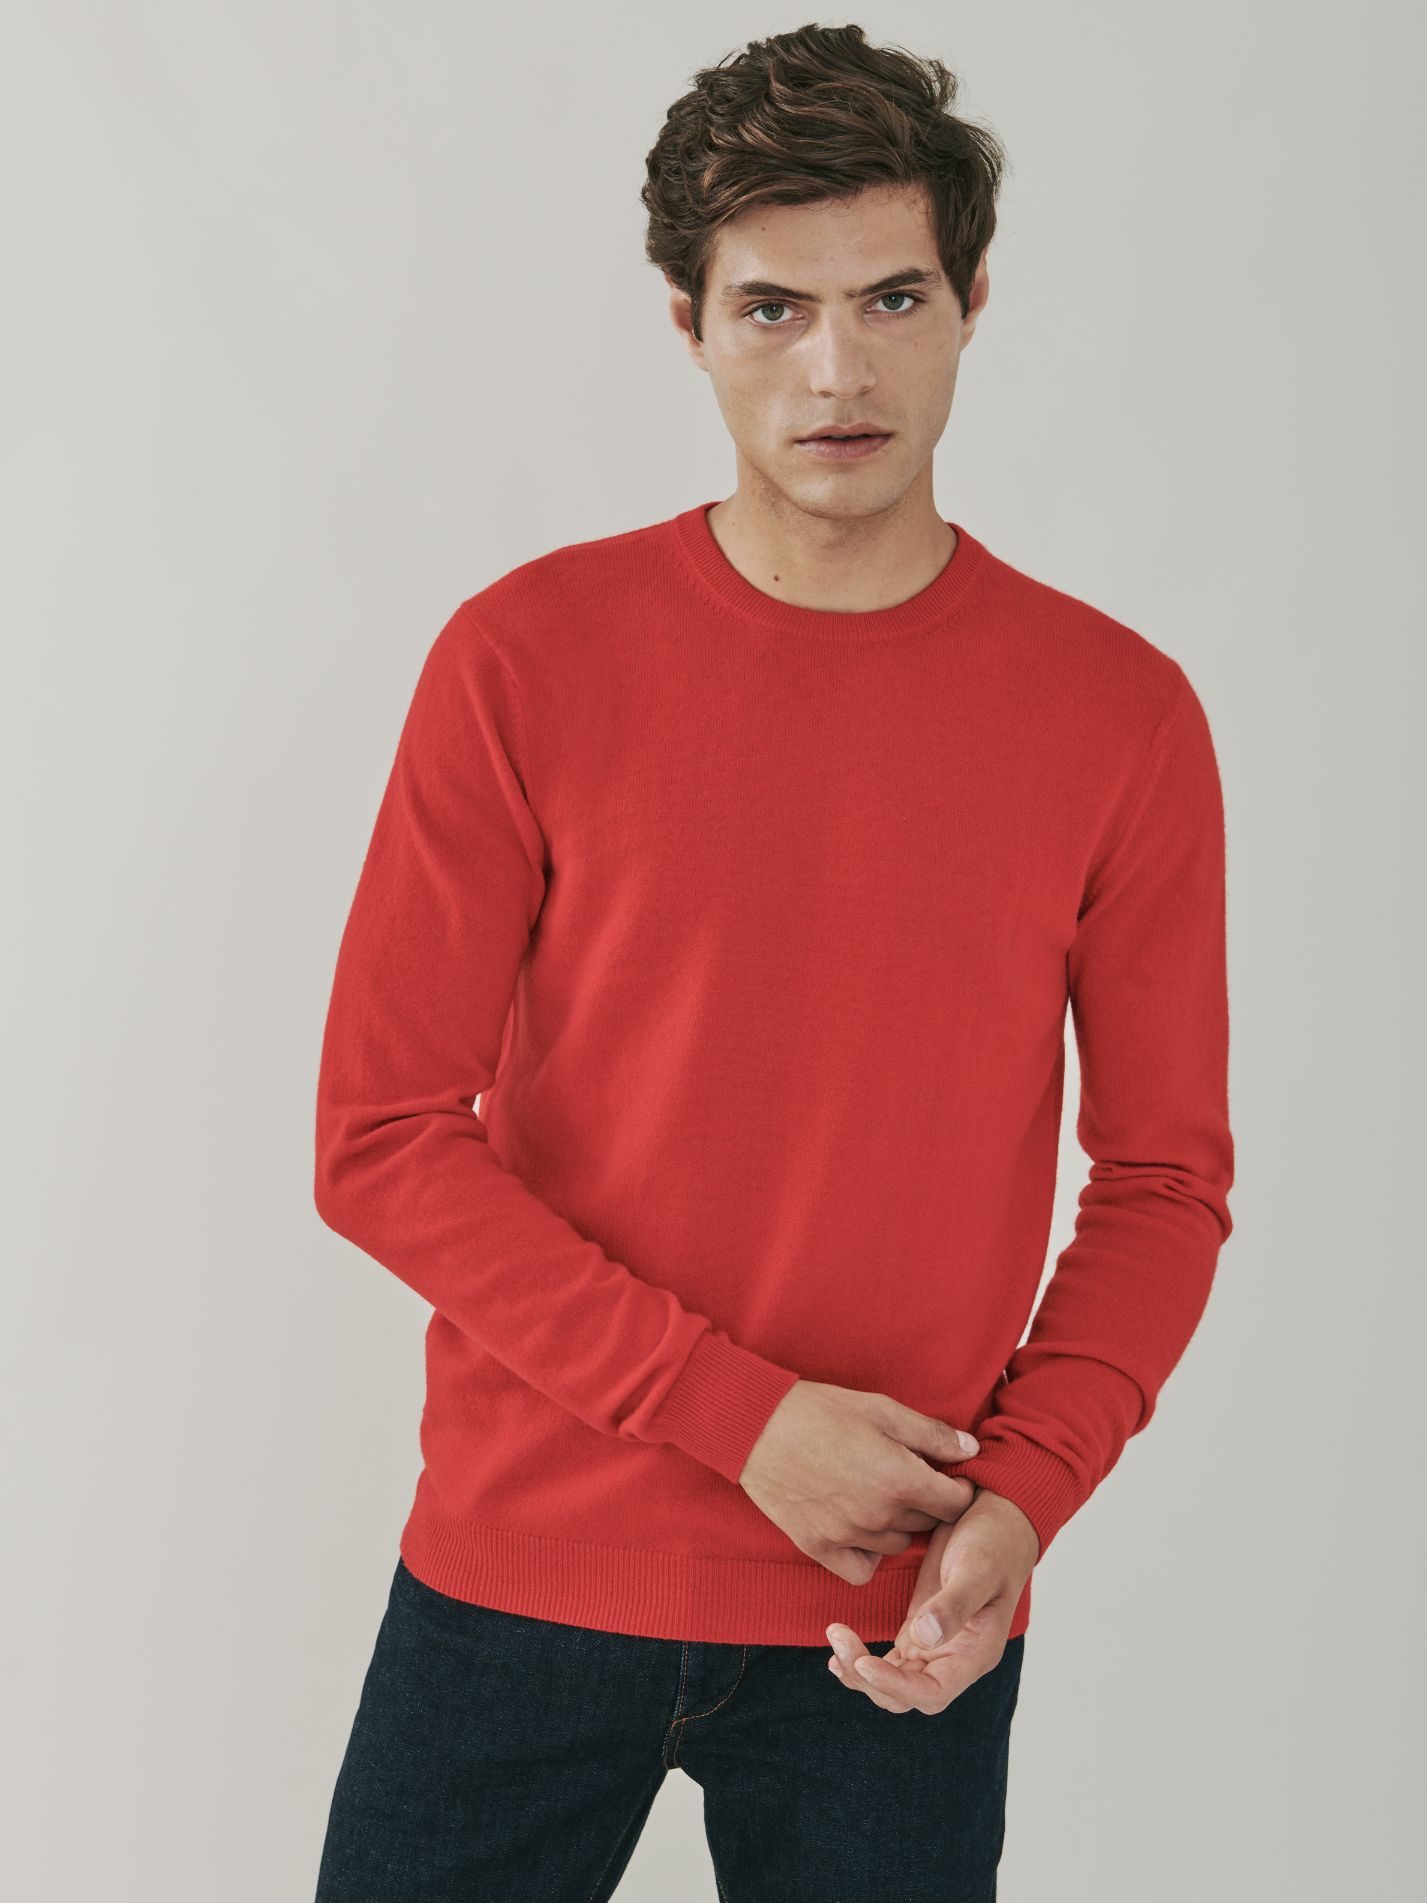 Canyon | Men's Cashmere Crew Neck sweater in Red | MrQuintessential